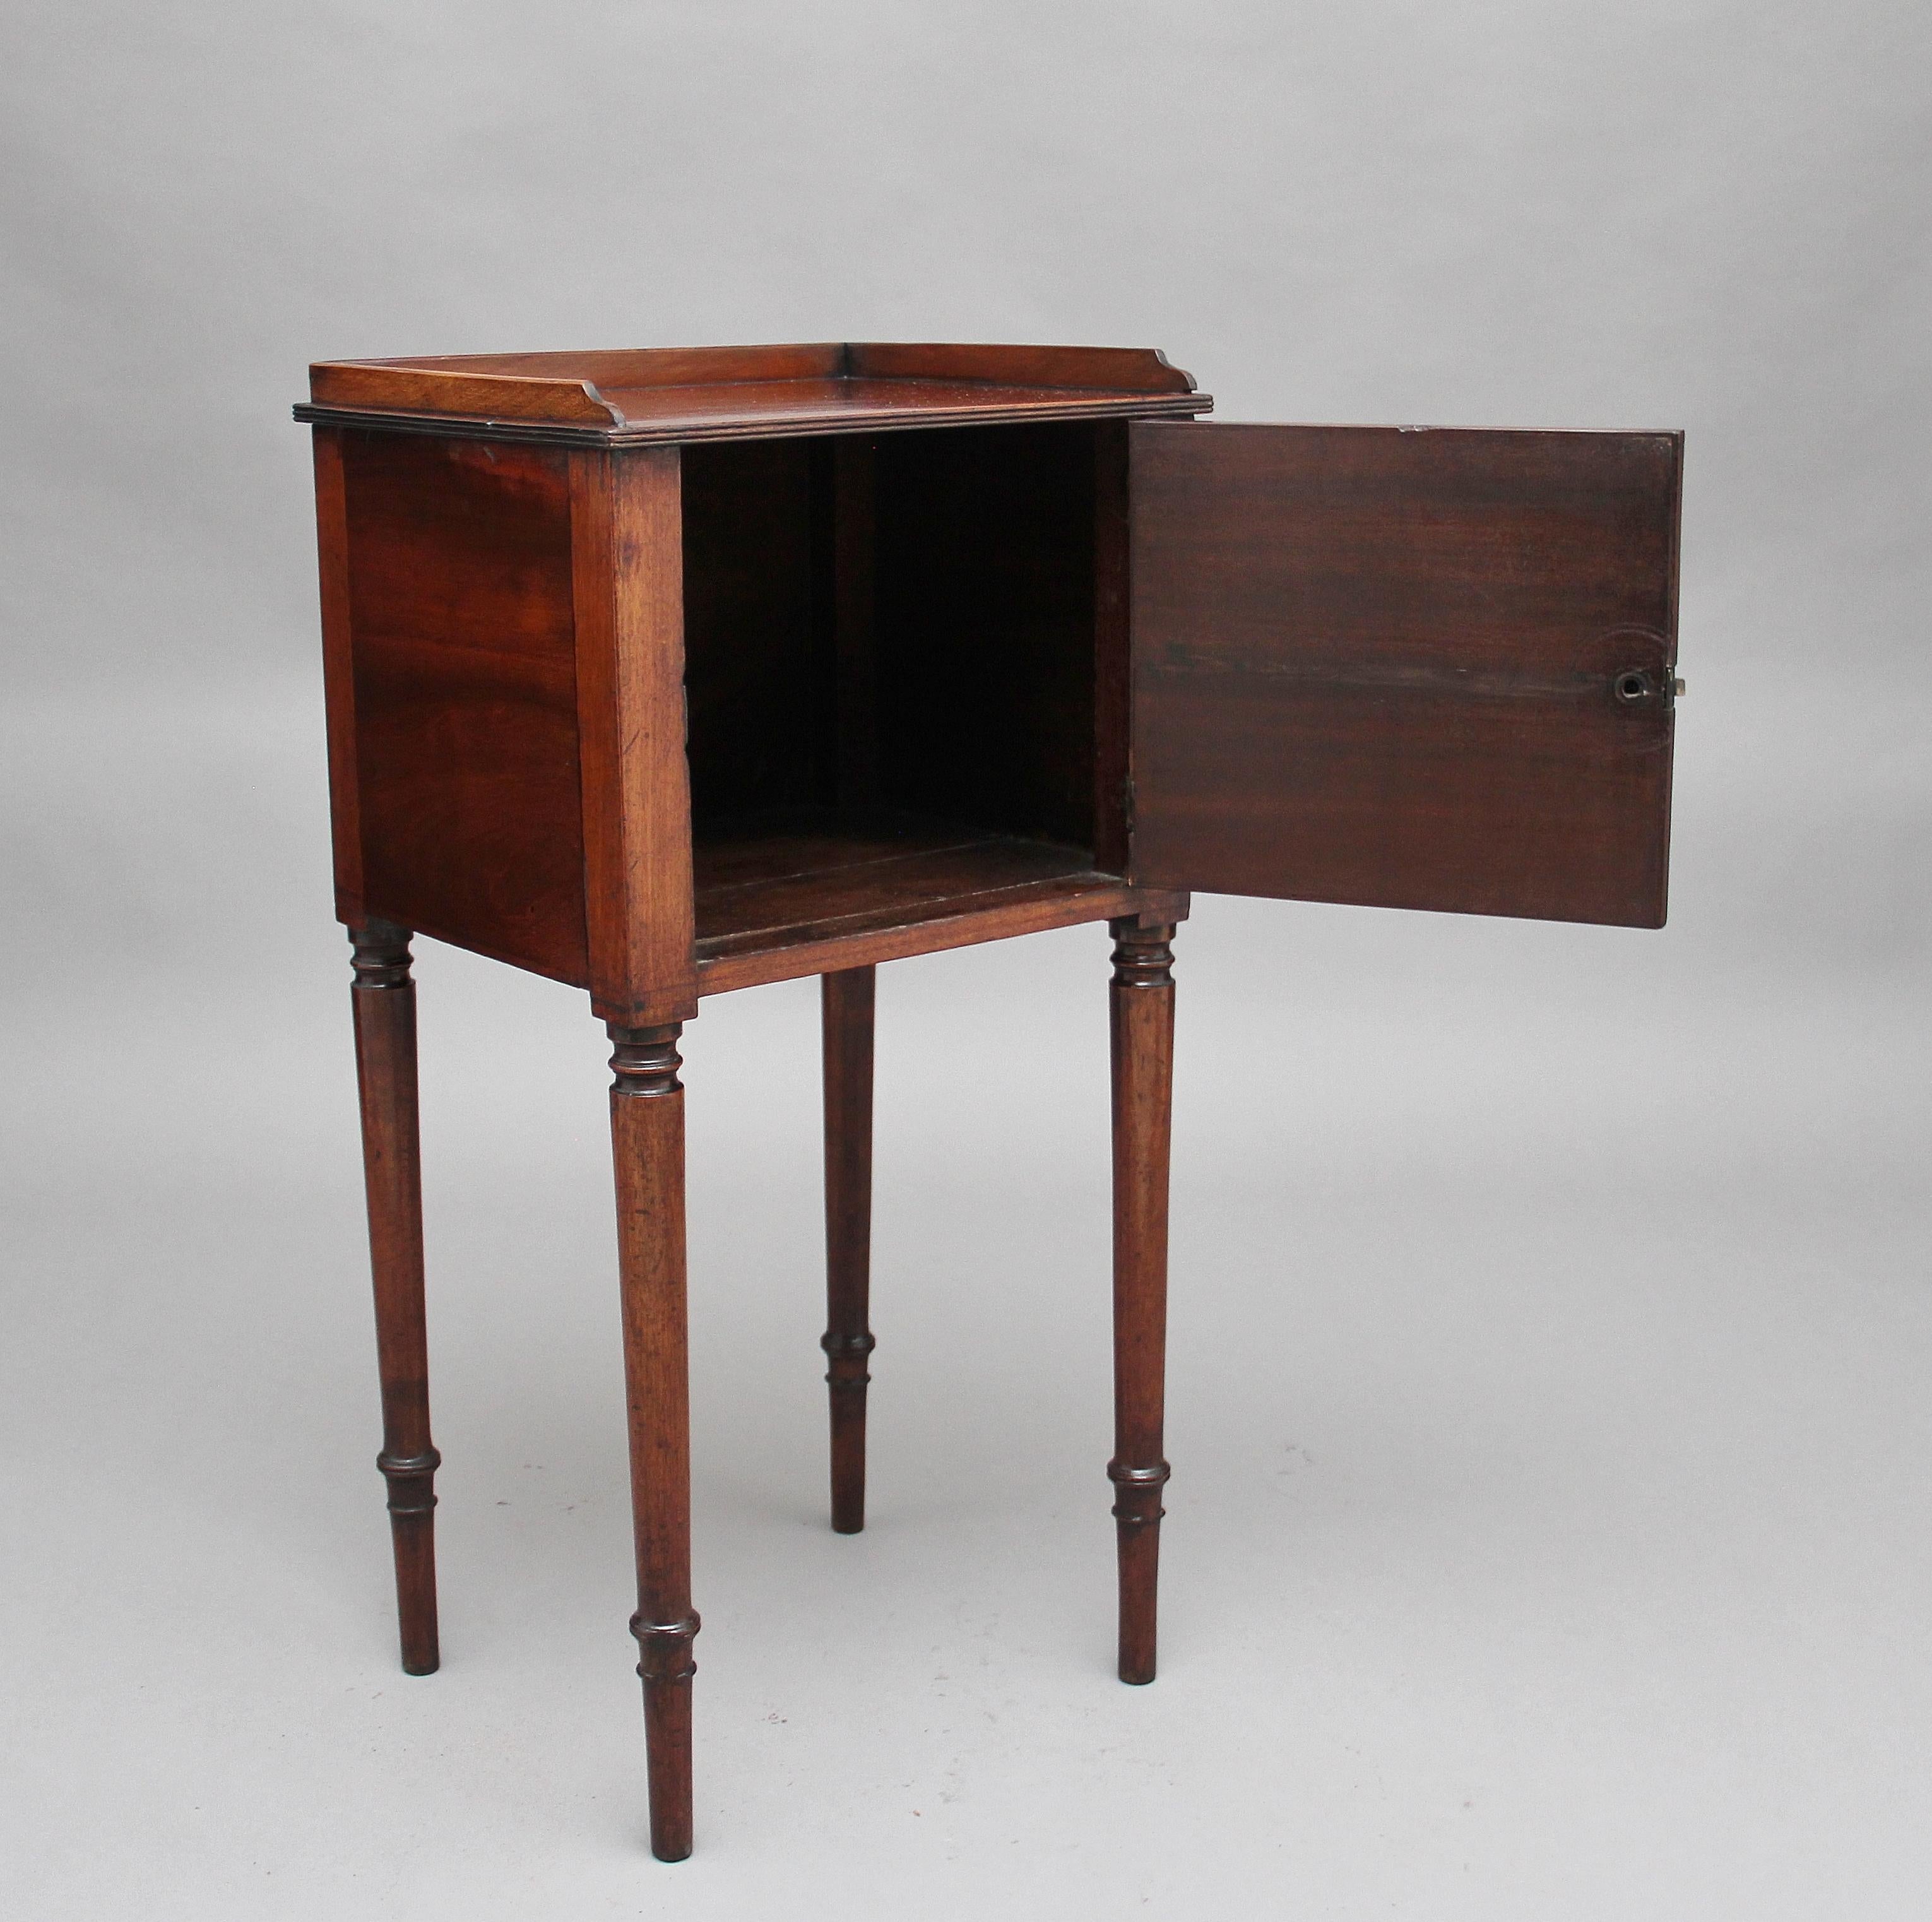 Early 19th century mahogany bedside cabinet, having a three a quarter gallery top above a hinged door raised on round turned legs, circa 1810.